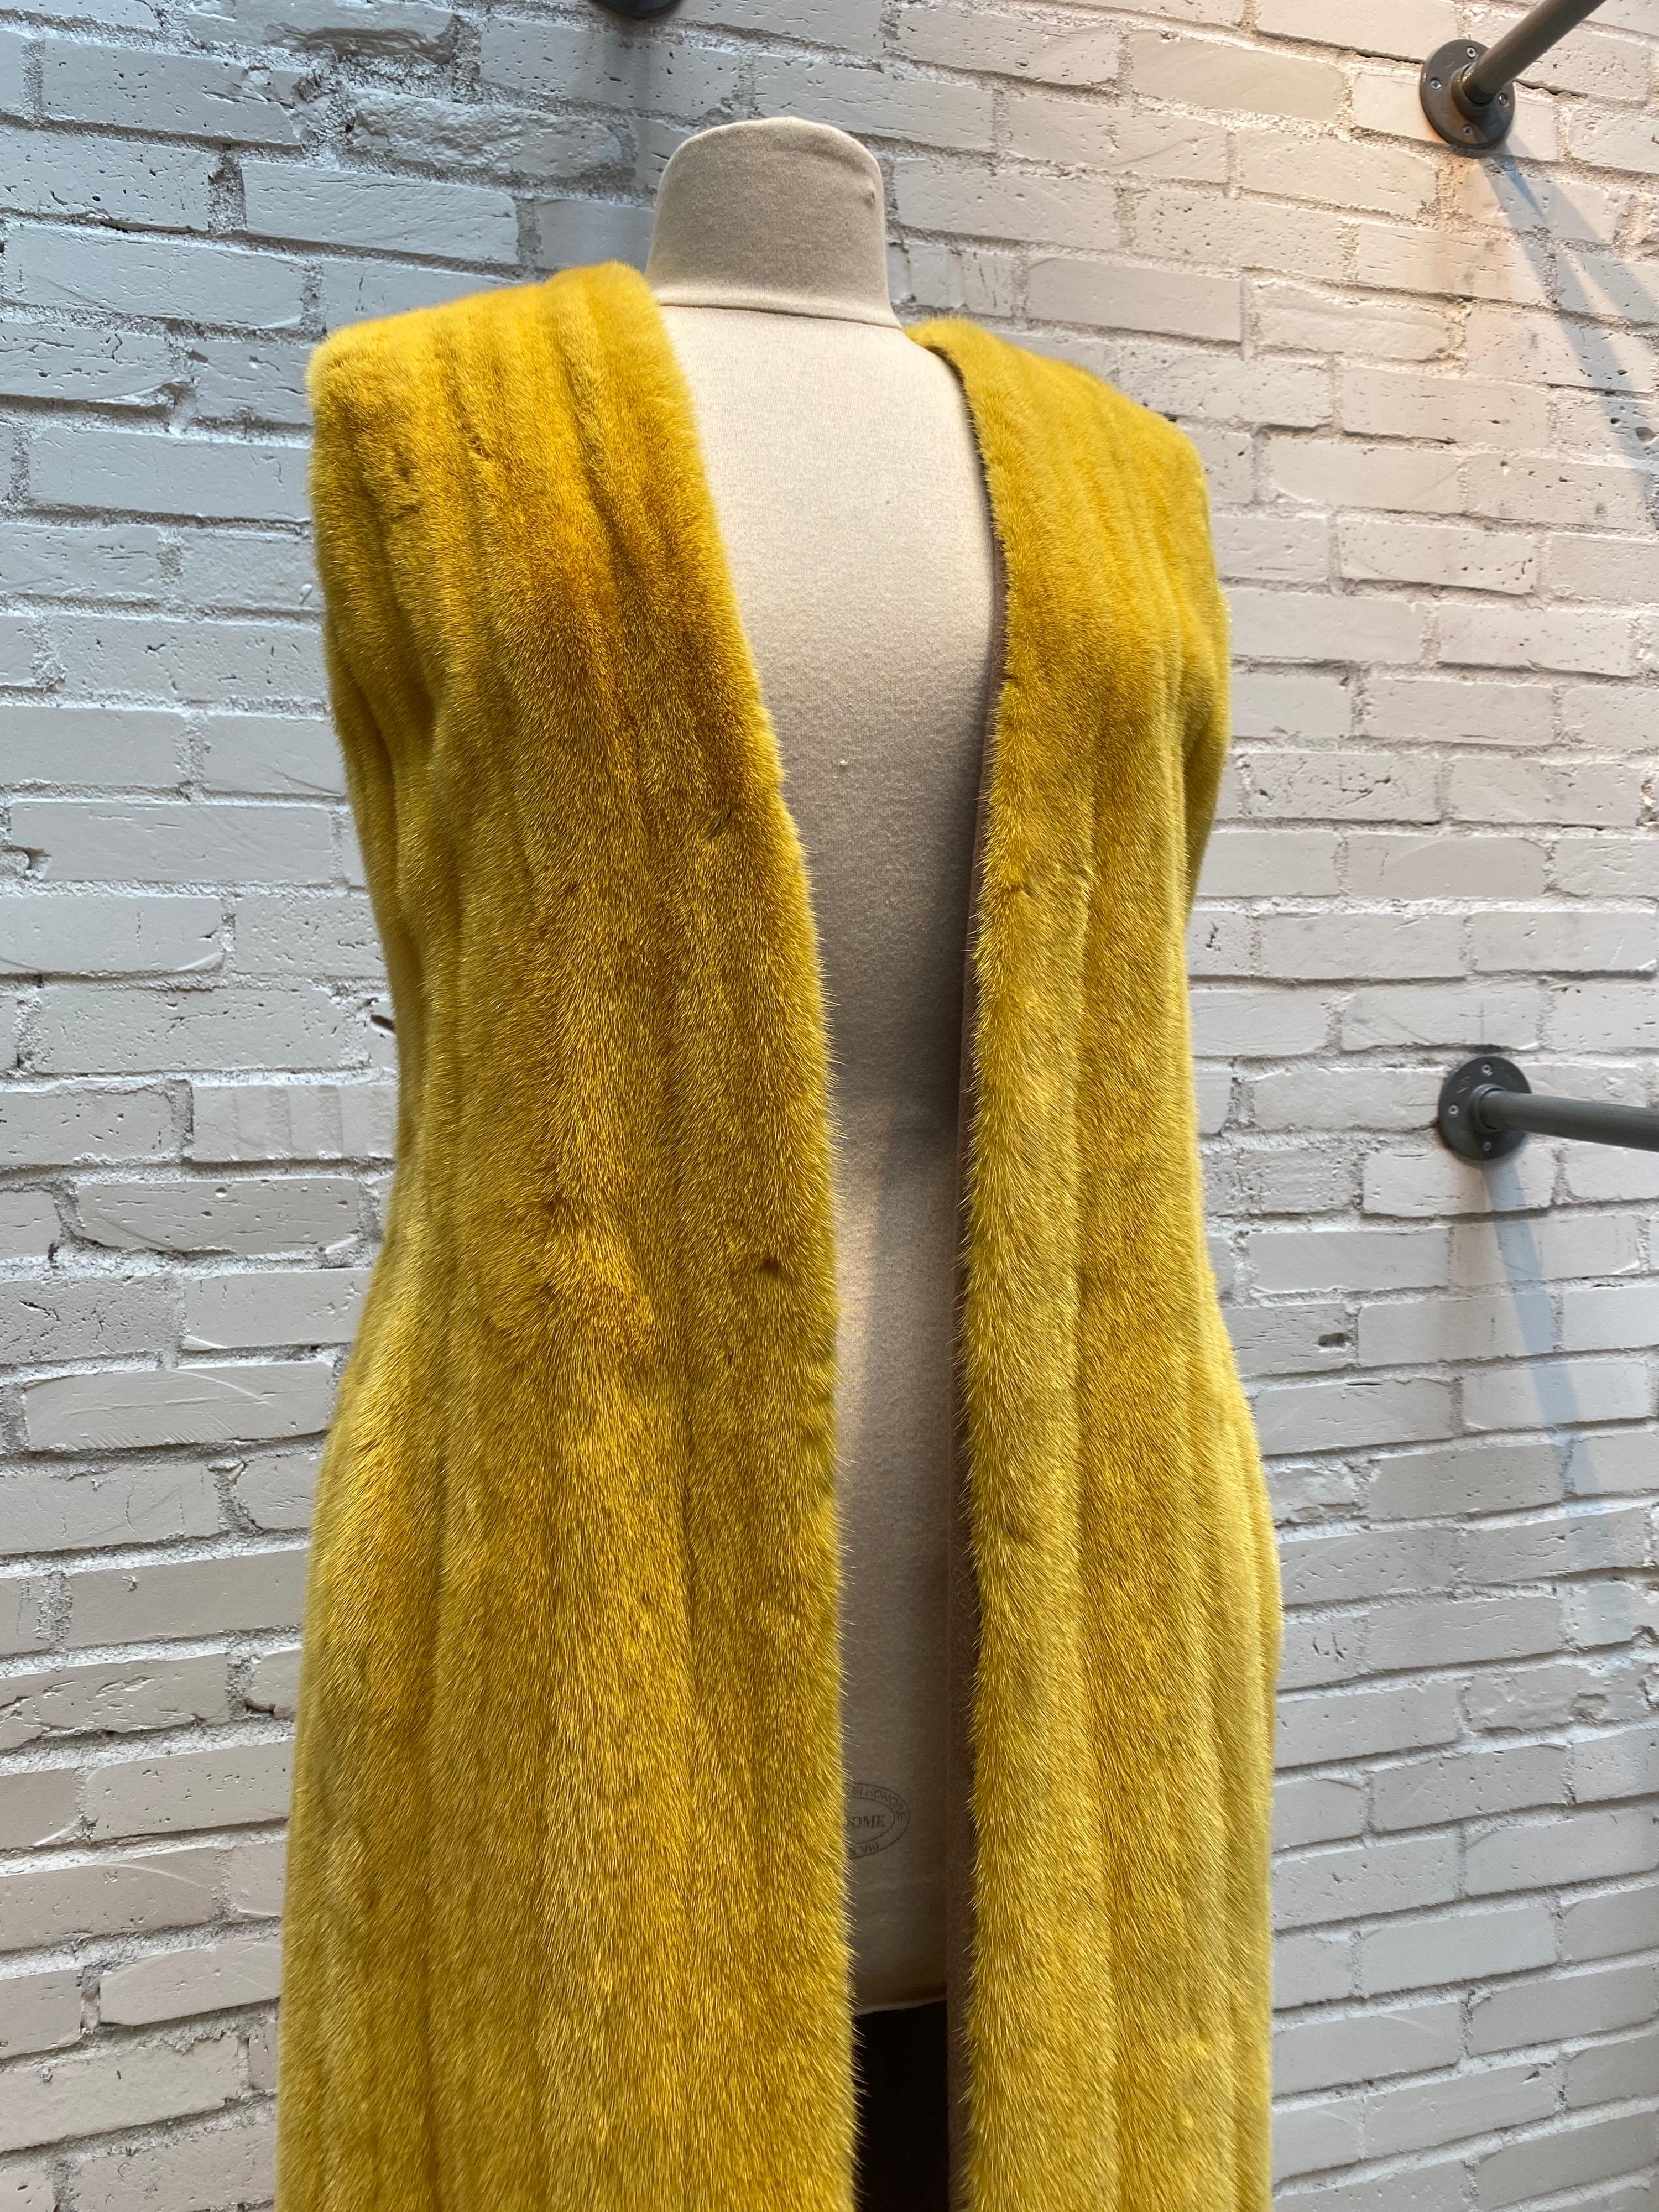 Length 48” marked size 4 
17” shoulder  
100% cashmere interior lining 
Beautiful full length yellow Mink vest by Dior. Purchased for over $40,000 at Nieman Marcus. Mint condition. Like new. Guaranteed authentic. 